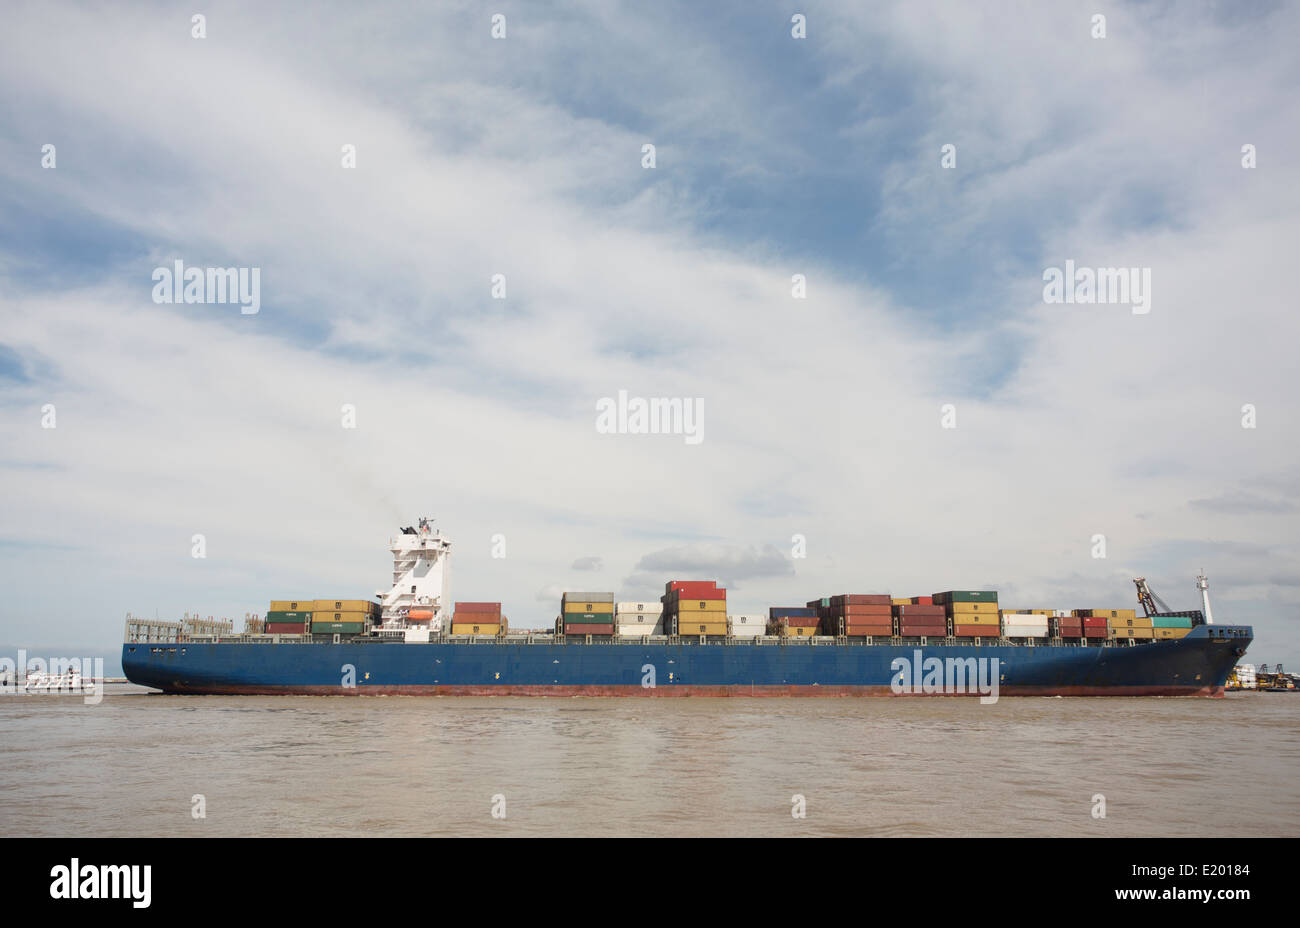 A wide angle view of a cargo ship against a bright, blue and white sky. Stock Photo